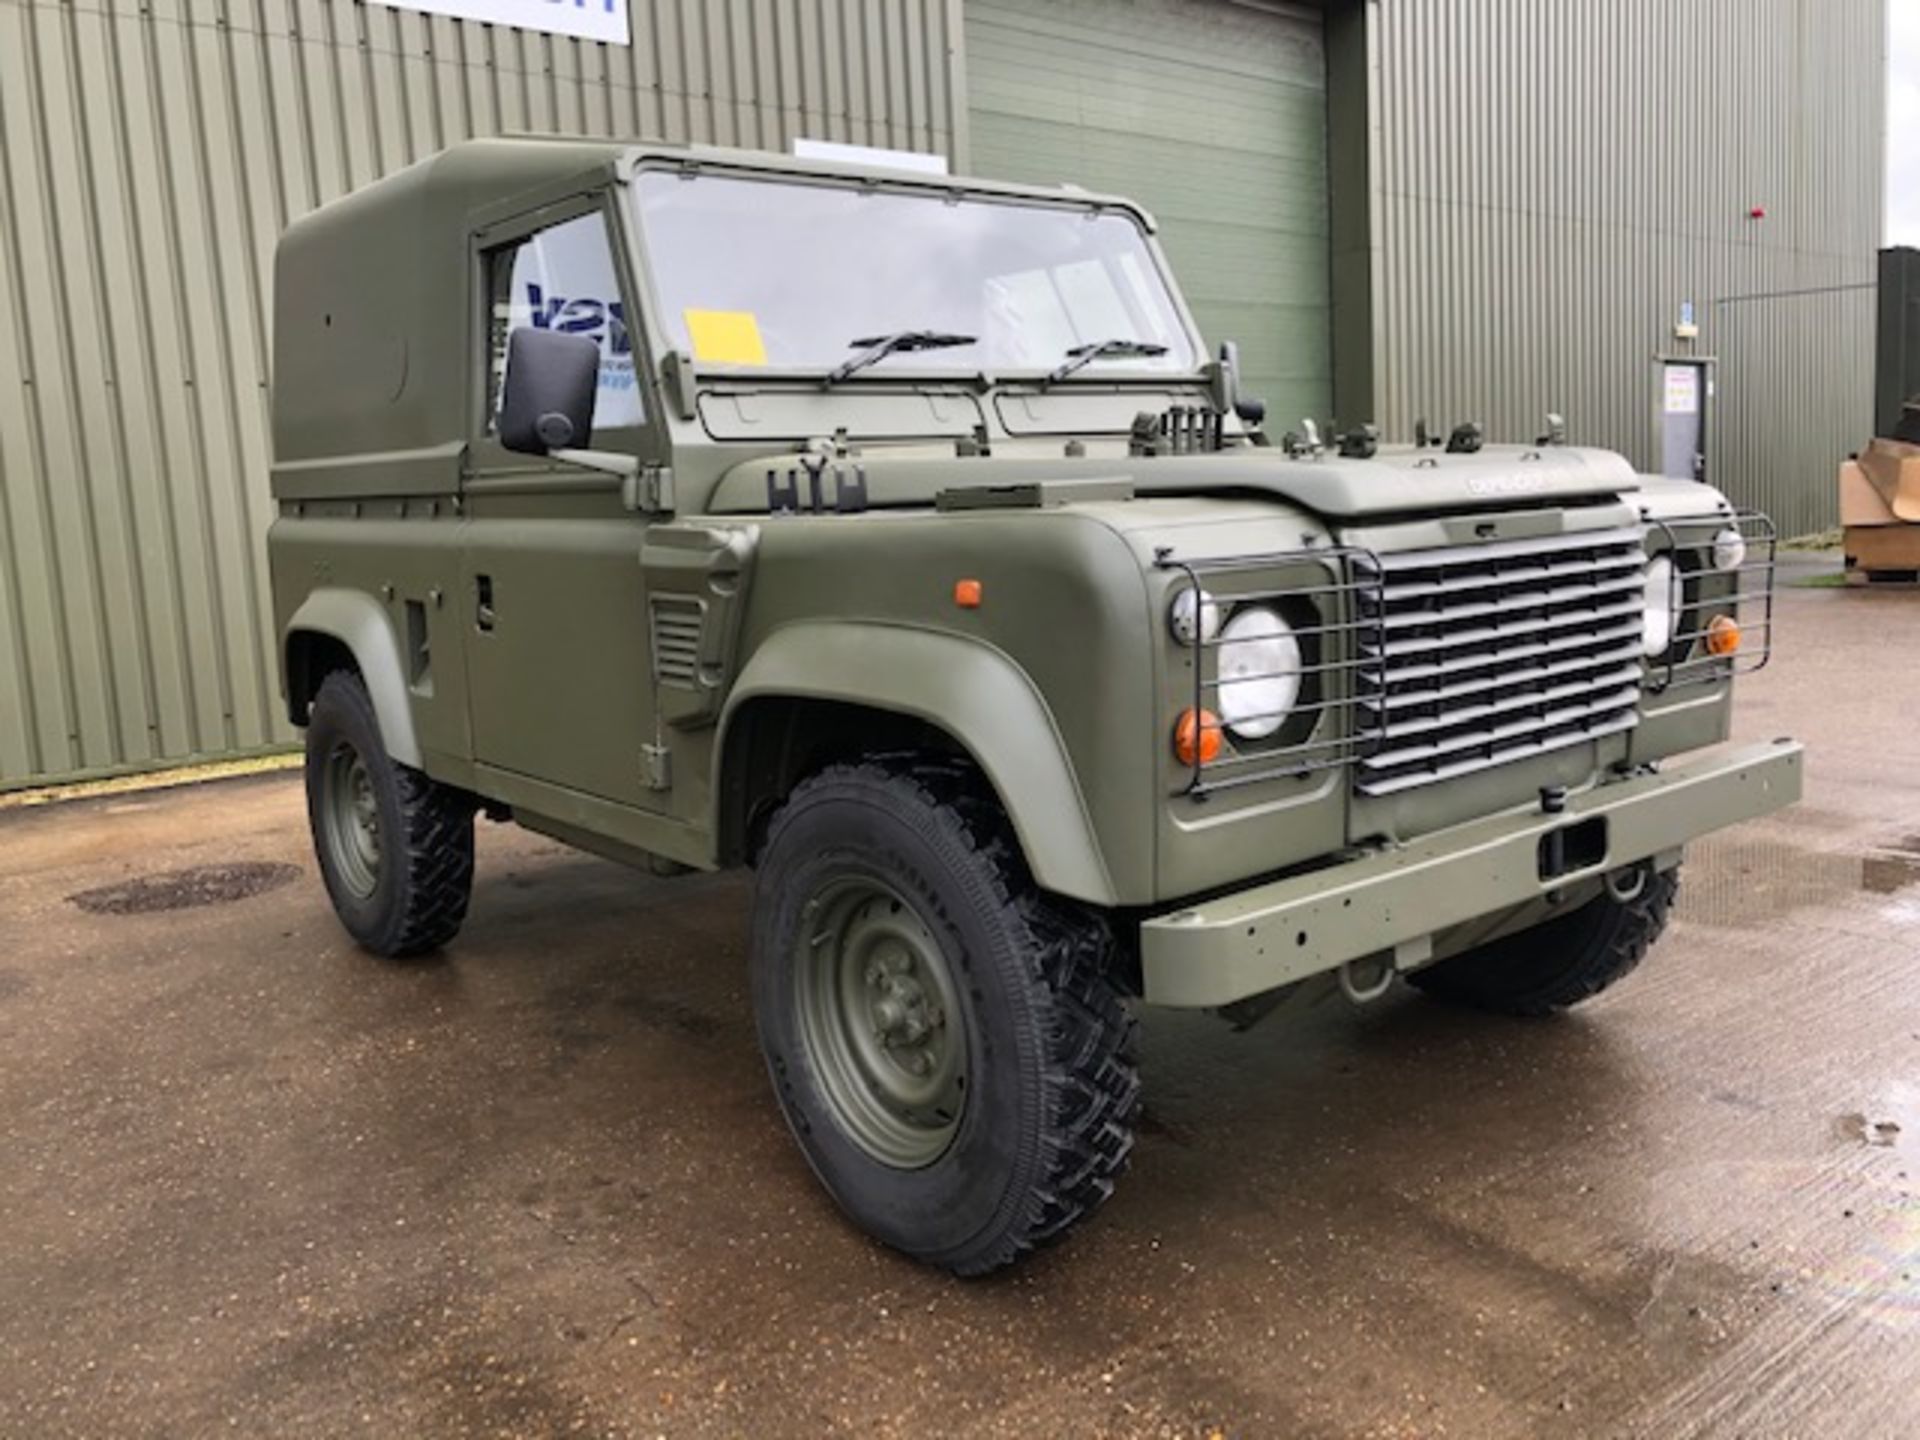 1998 Land Rover Wolf 90 Hard Top with Remus upgrade ONLY 73,650km - approx 45,000 miles! - Image 10 of 42